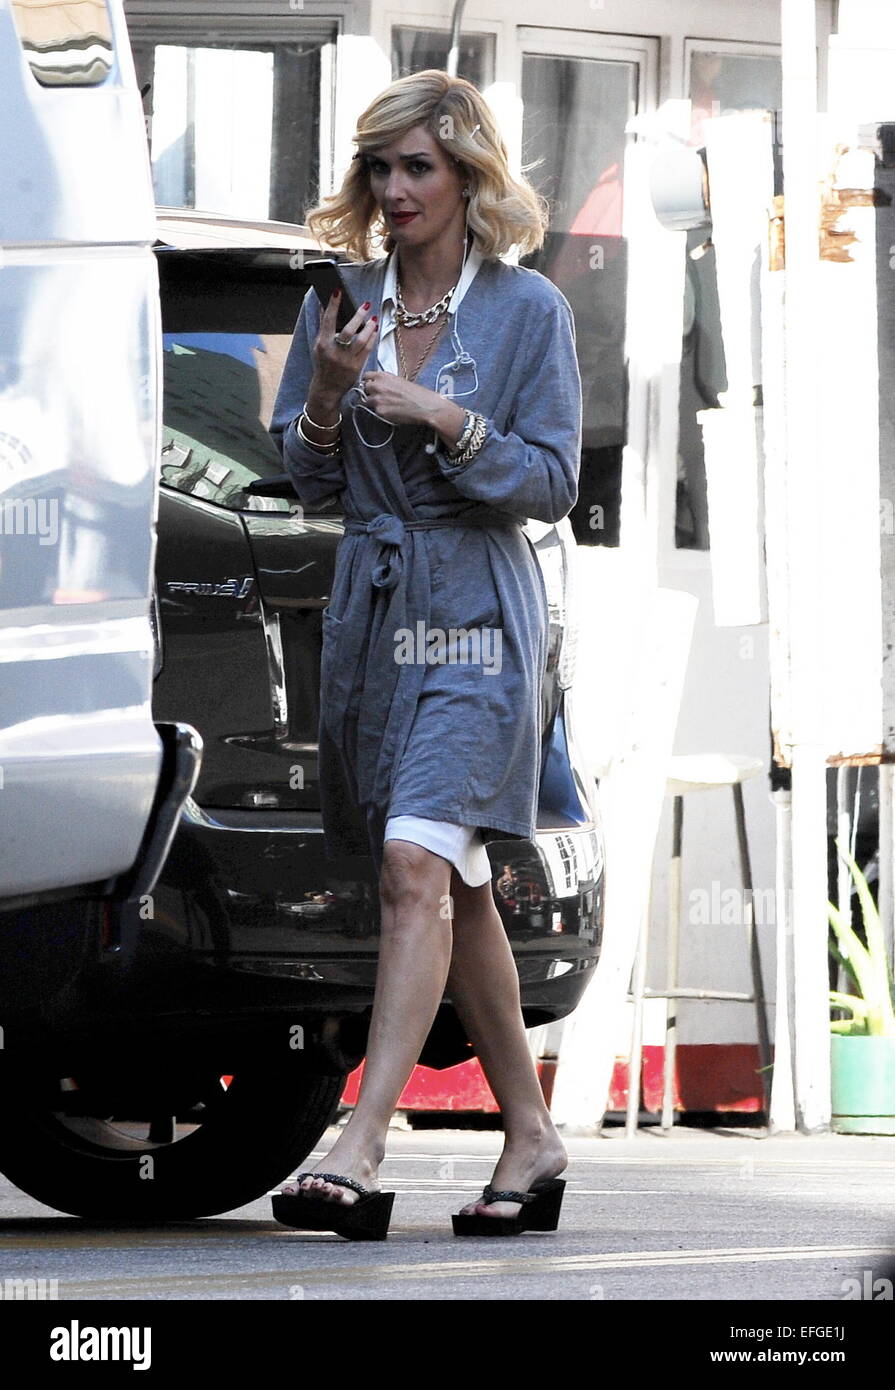 Paz Vega sports a blonde hairdo on the set of 'Beautiful and Twisted,' which is currently filming in downtown Los Angeles. Vega plays a former stripper who is a prime suspect in the murder of her husband.  Featuring: Paz Vega Where: Los Angeles, Californi Stock Photo